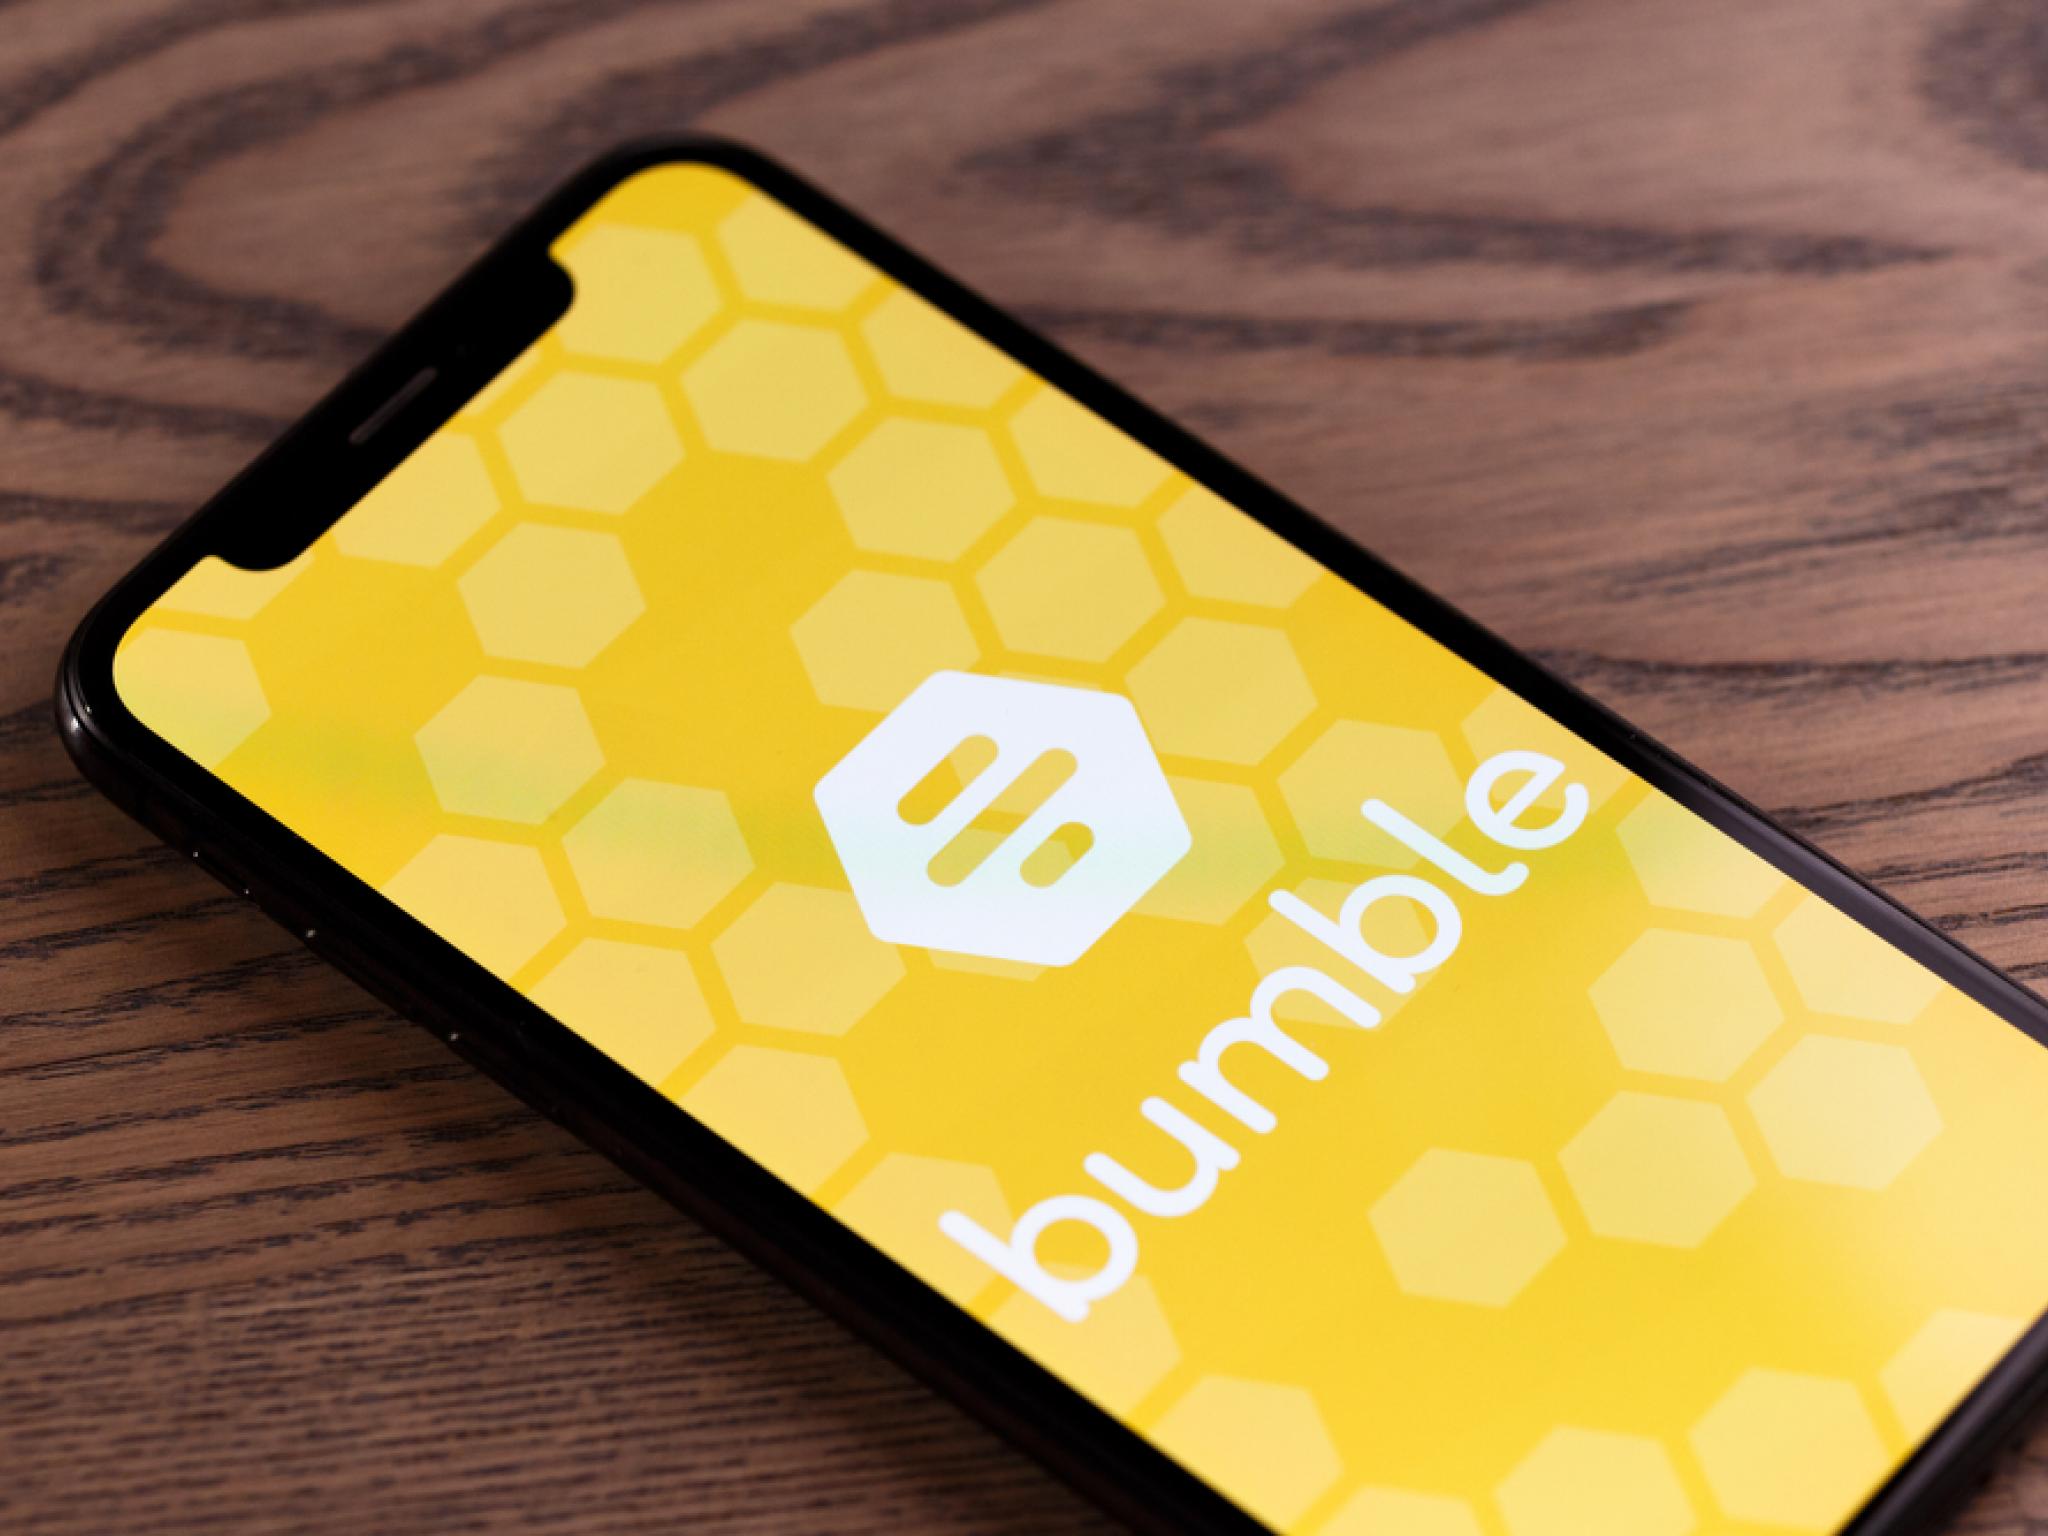  these-analysts-revise-their-forecasts-on-bumble-following-q1-results 